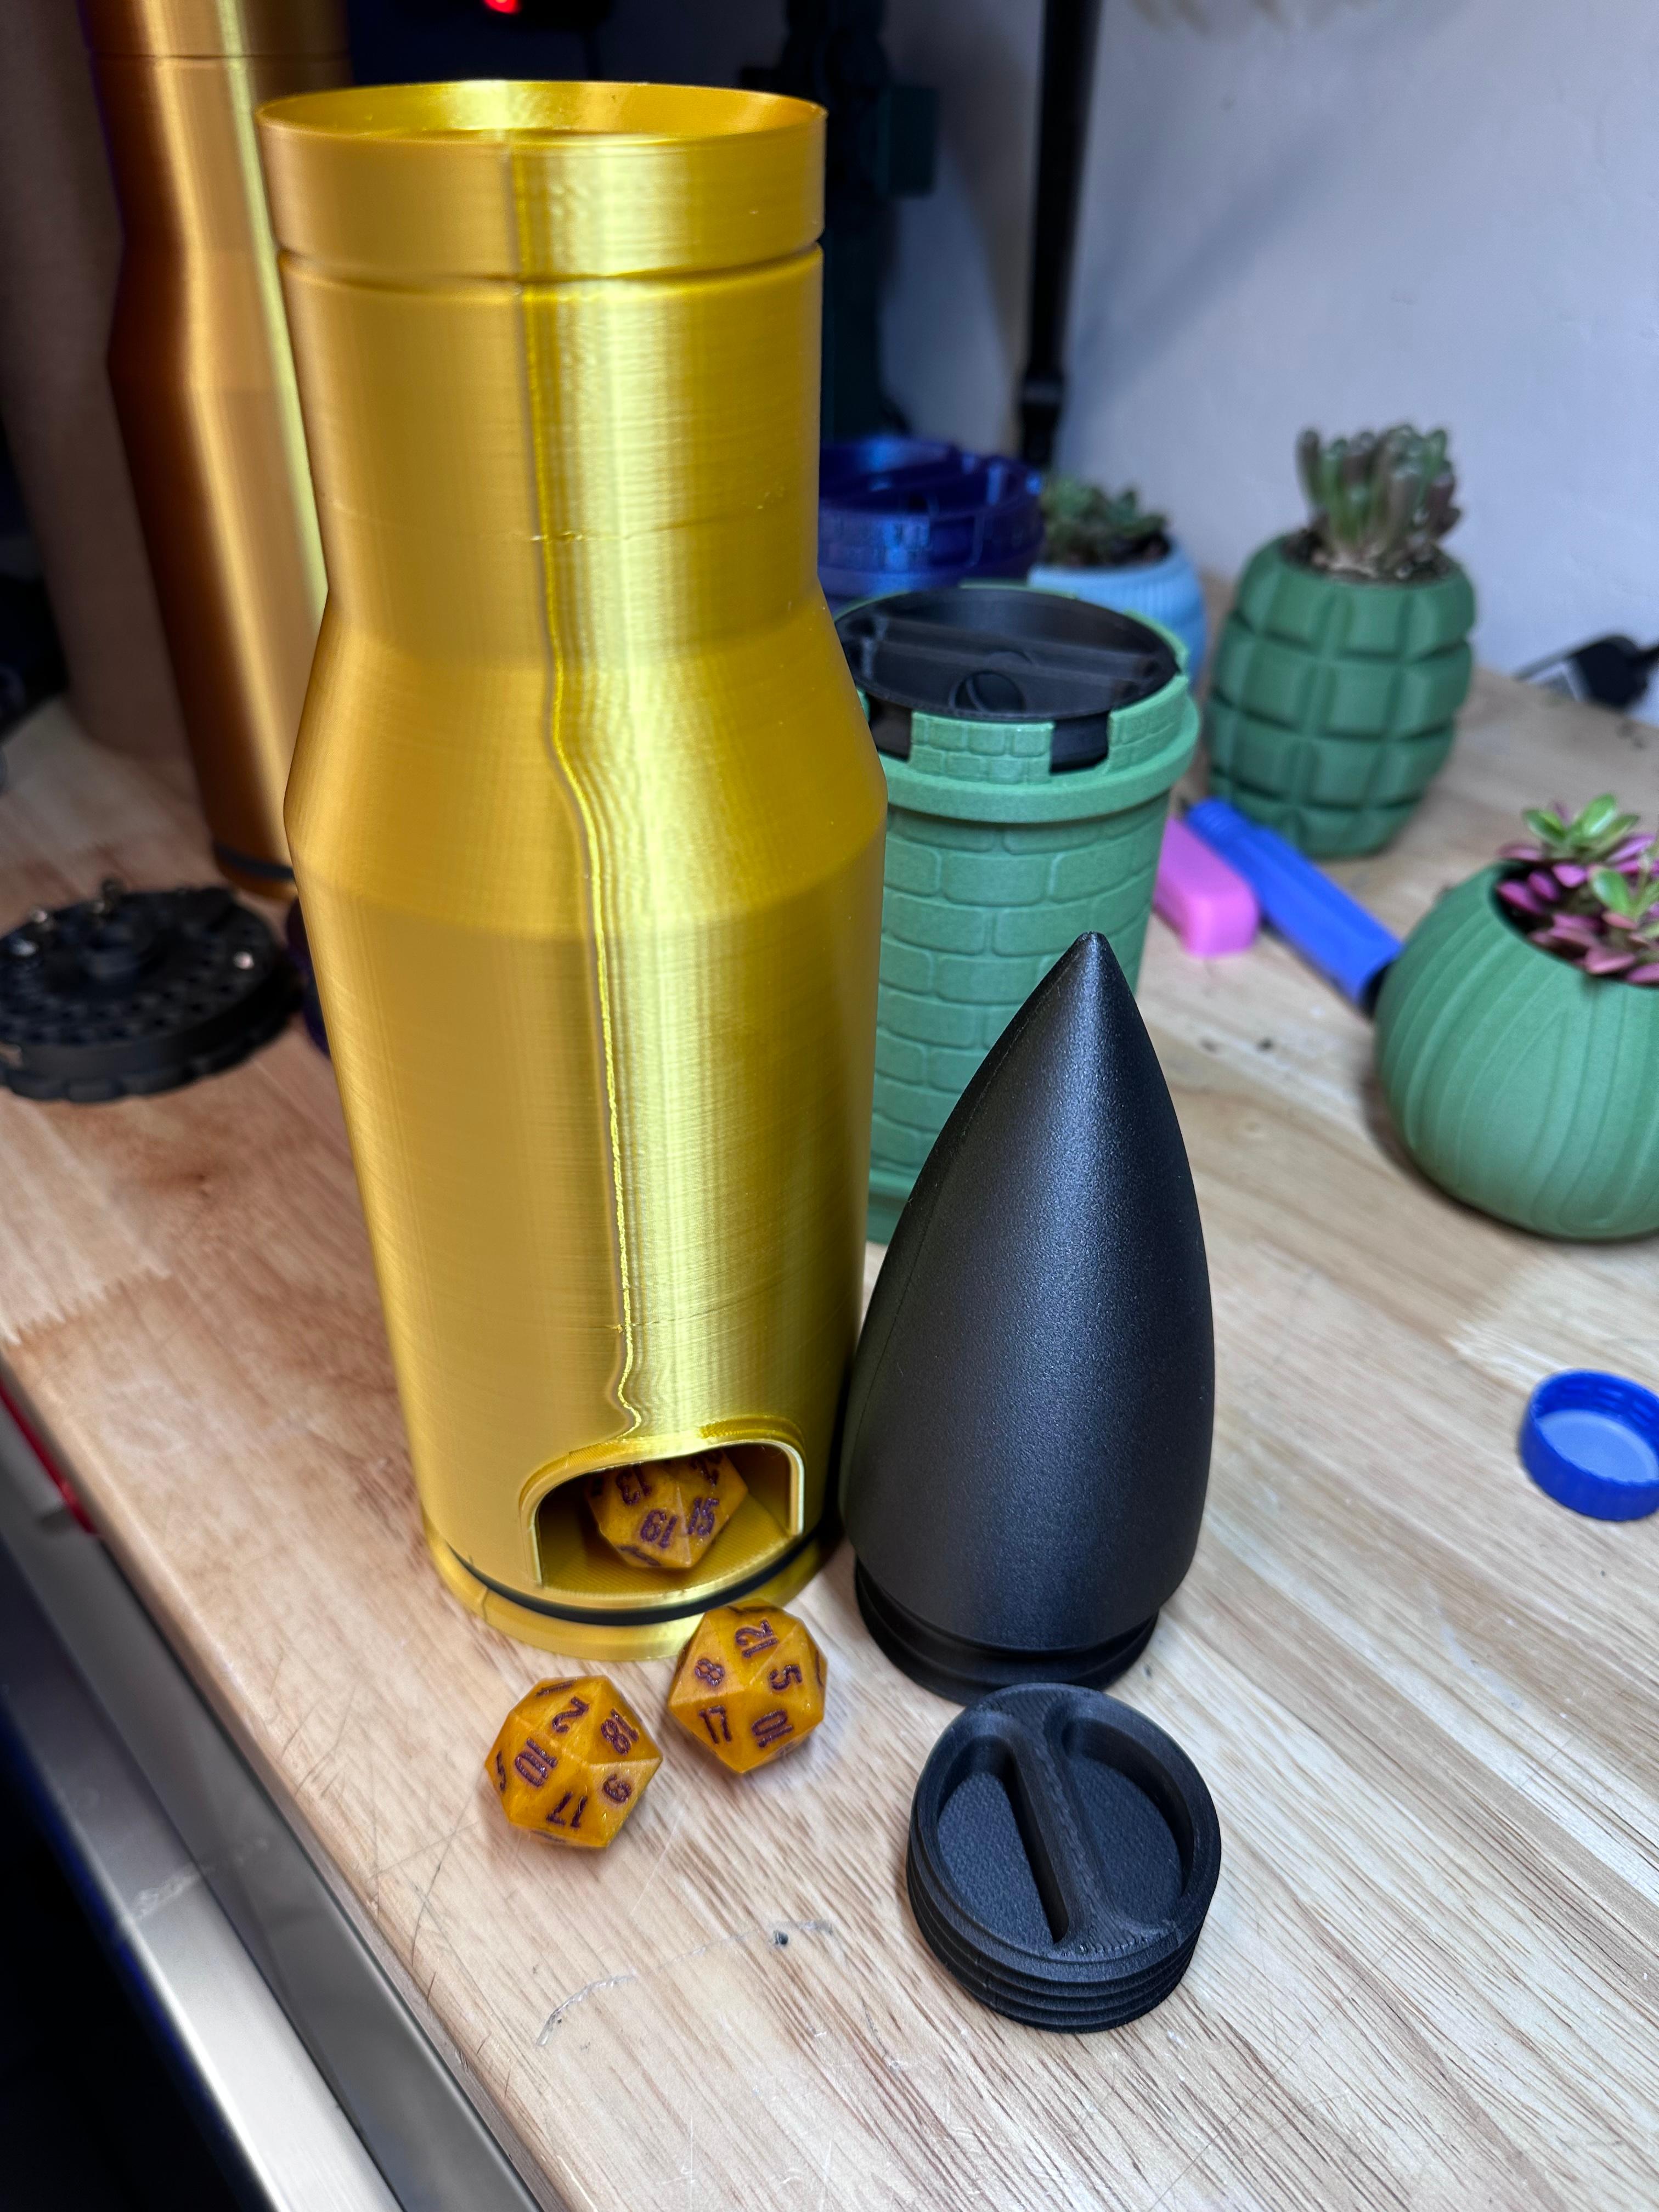 50 CALIBER DICE TOWER - LARGE ARTILLERY SHELL THAT IS ALSO A DICE TOWER AND STORAGE FOR THE ULTIMATE 3d model